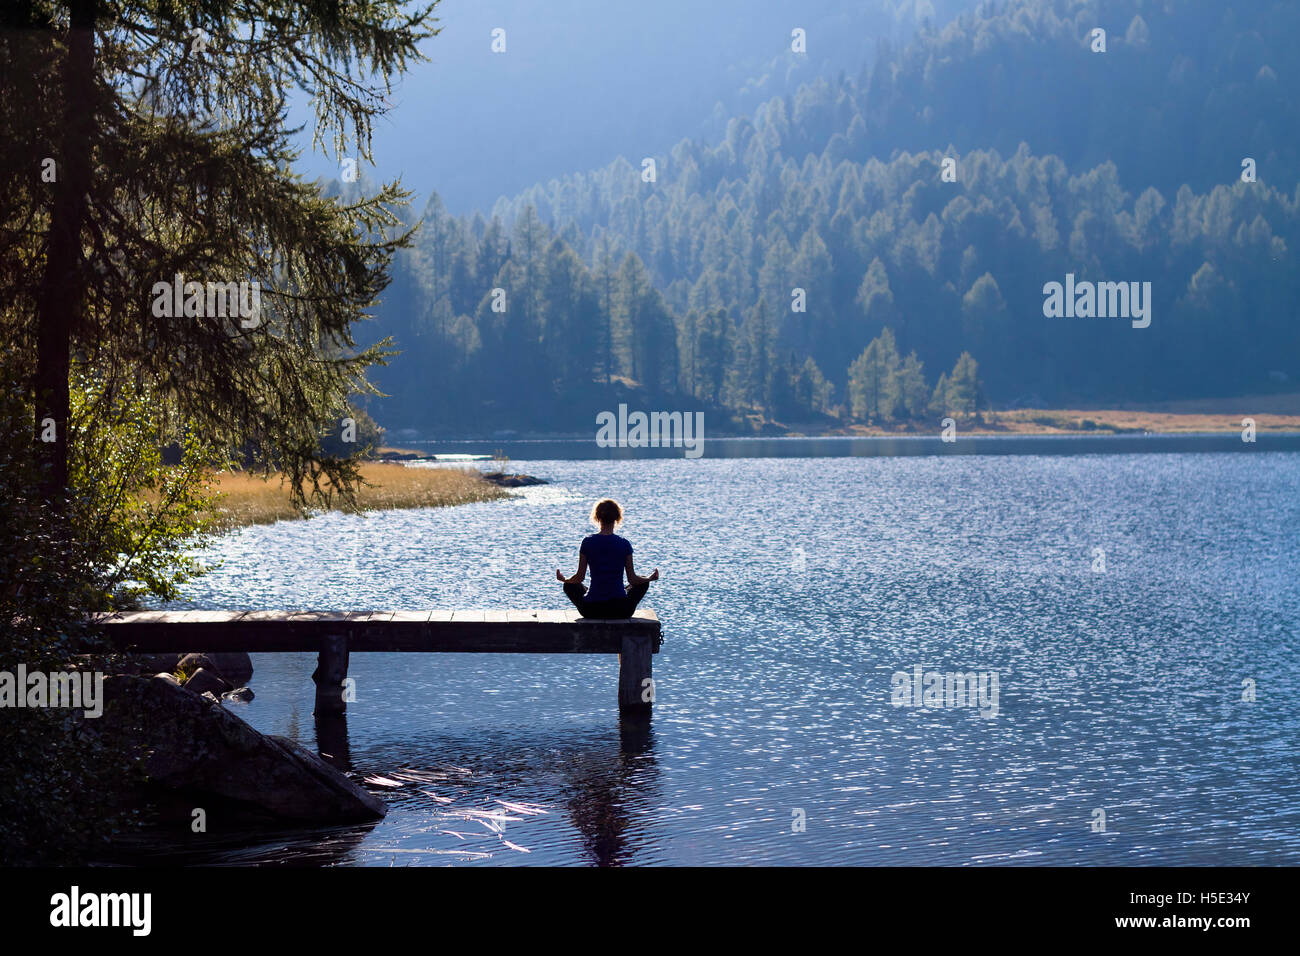 Pretty woman practicing yoga at a lake Banque D'Images